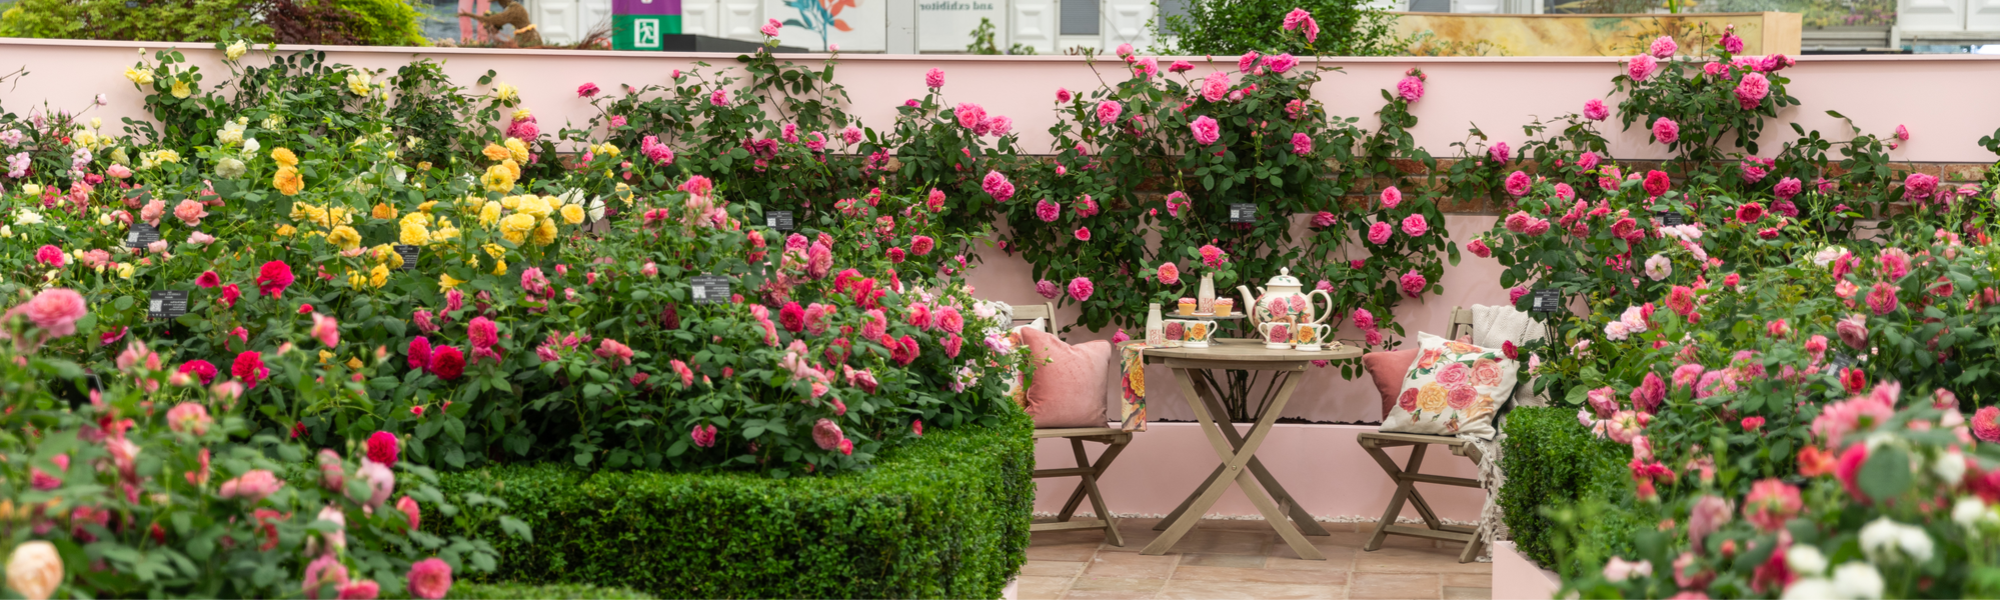 David Austin Roses stand at RHS Chelsea Flower Show 